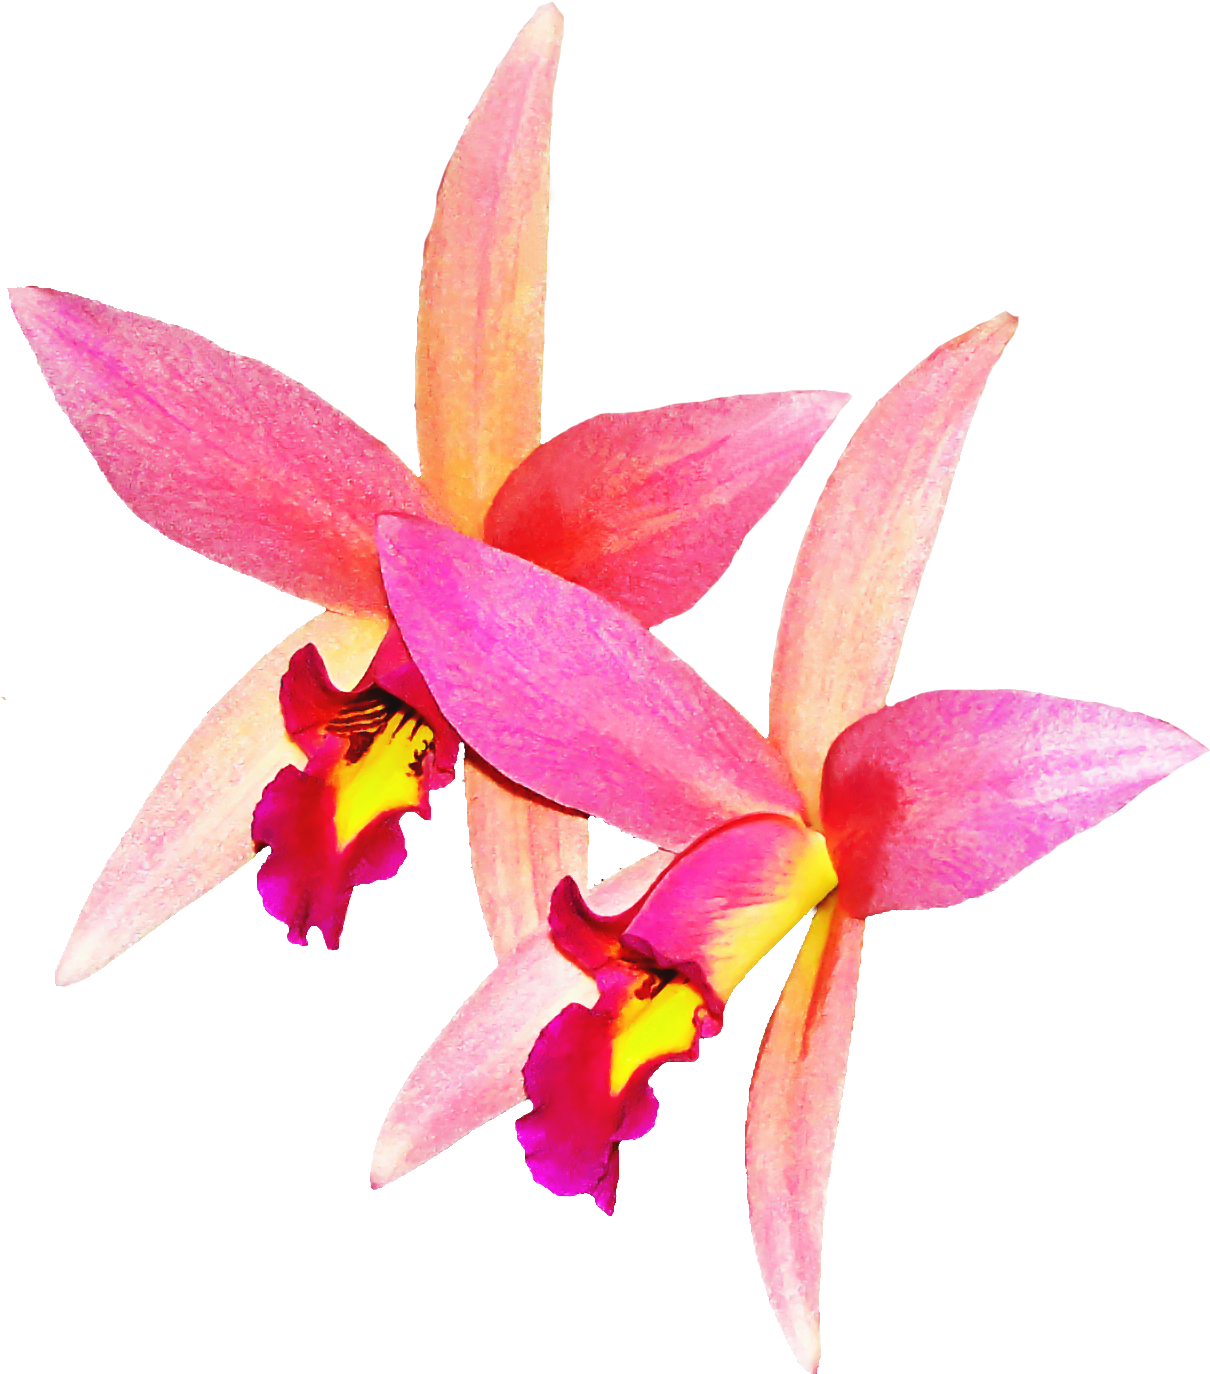 Orchid Flower Png Image - เวก เตอร์ ดอก กล้วยไม้ Clipart (2332x1896), Png Download